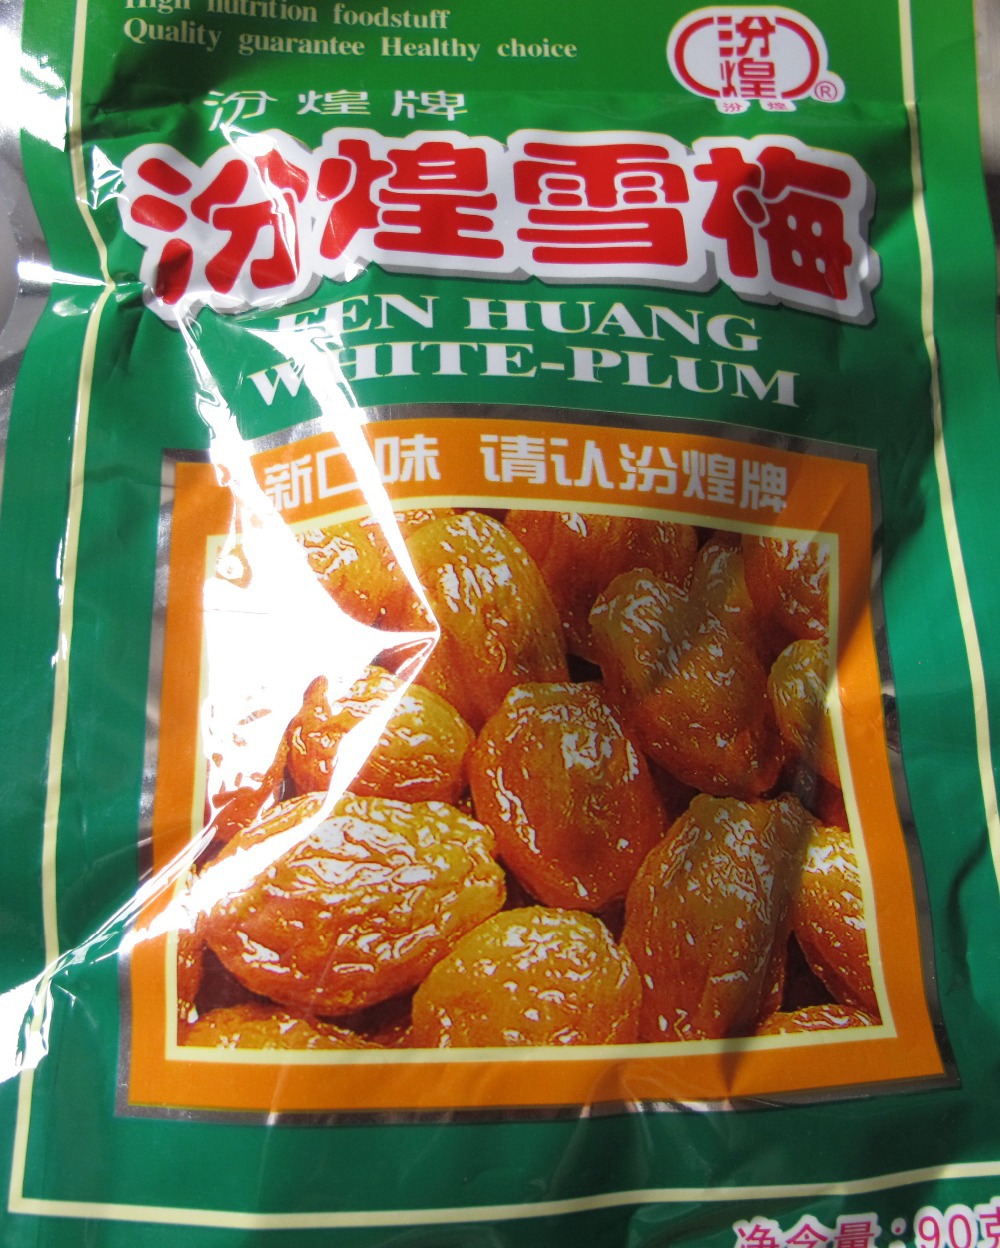 Apricot kernel Almonds Nuts Aid digestion 